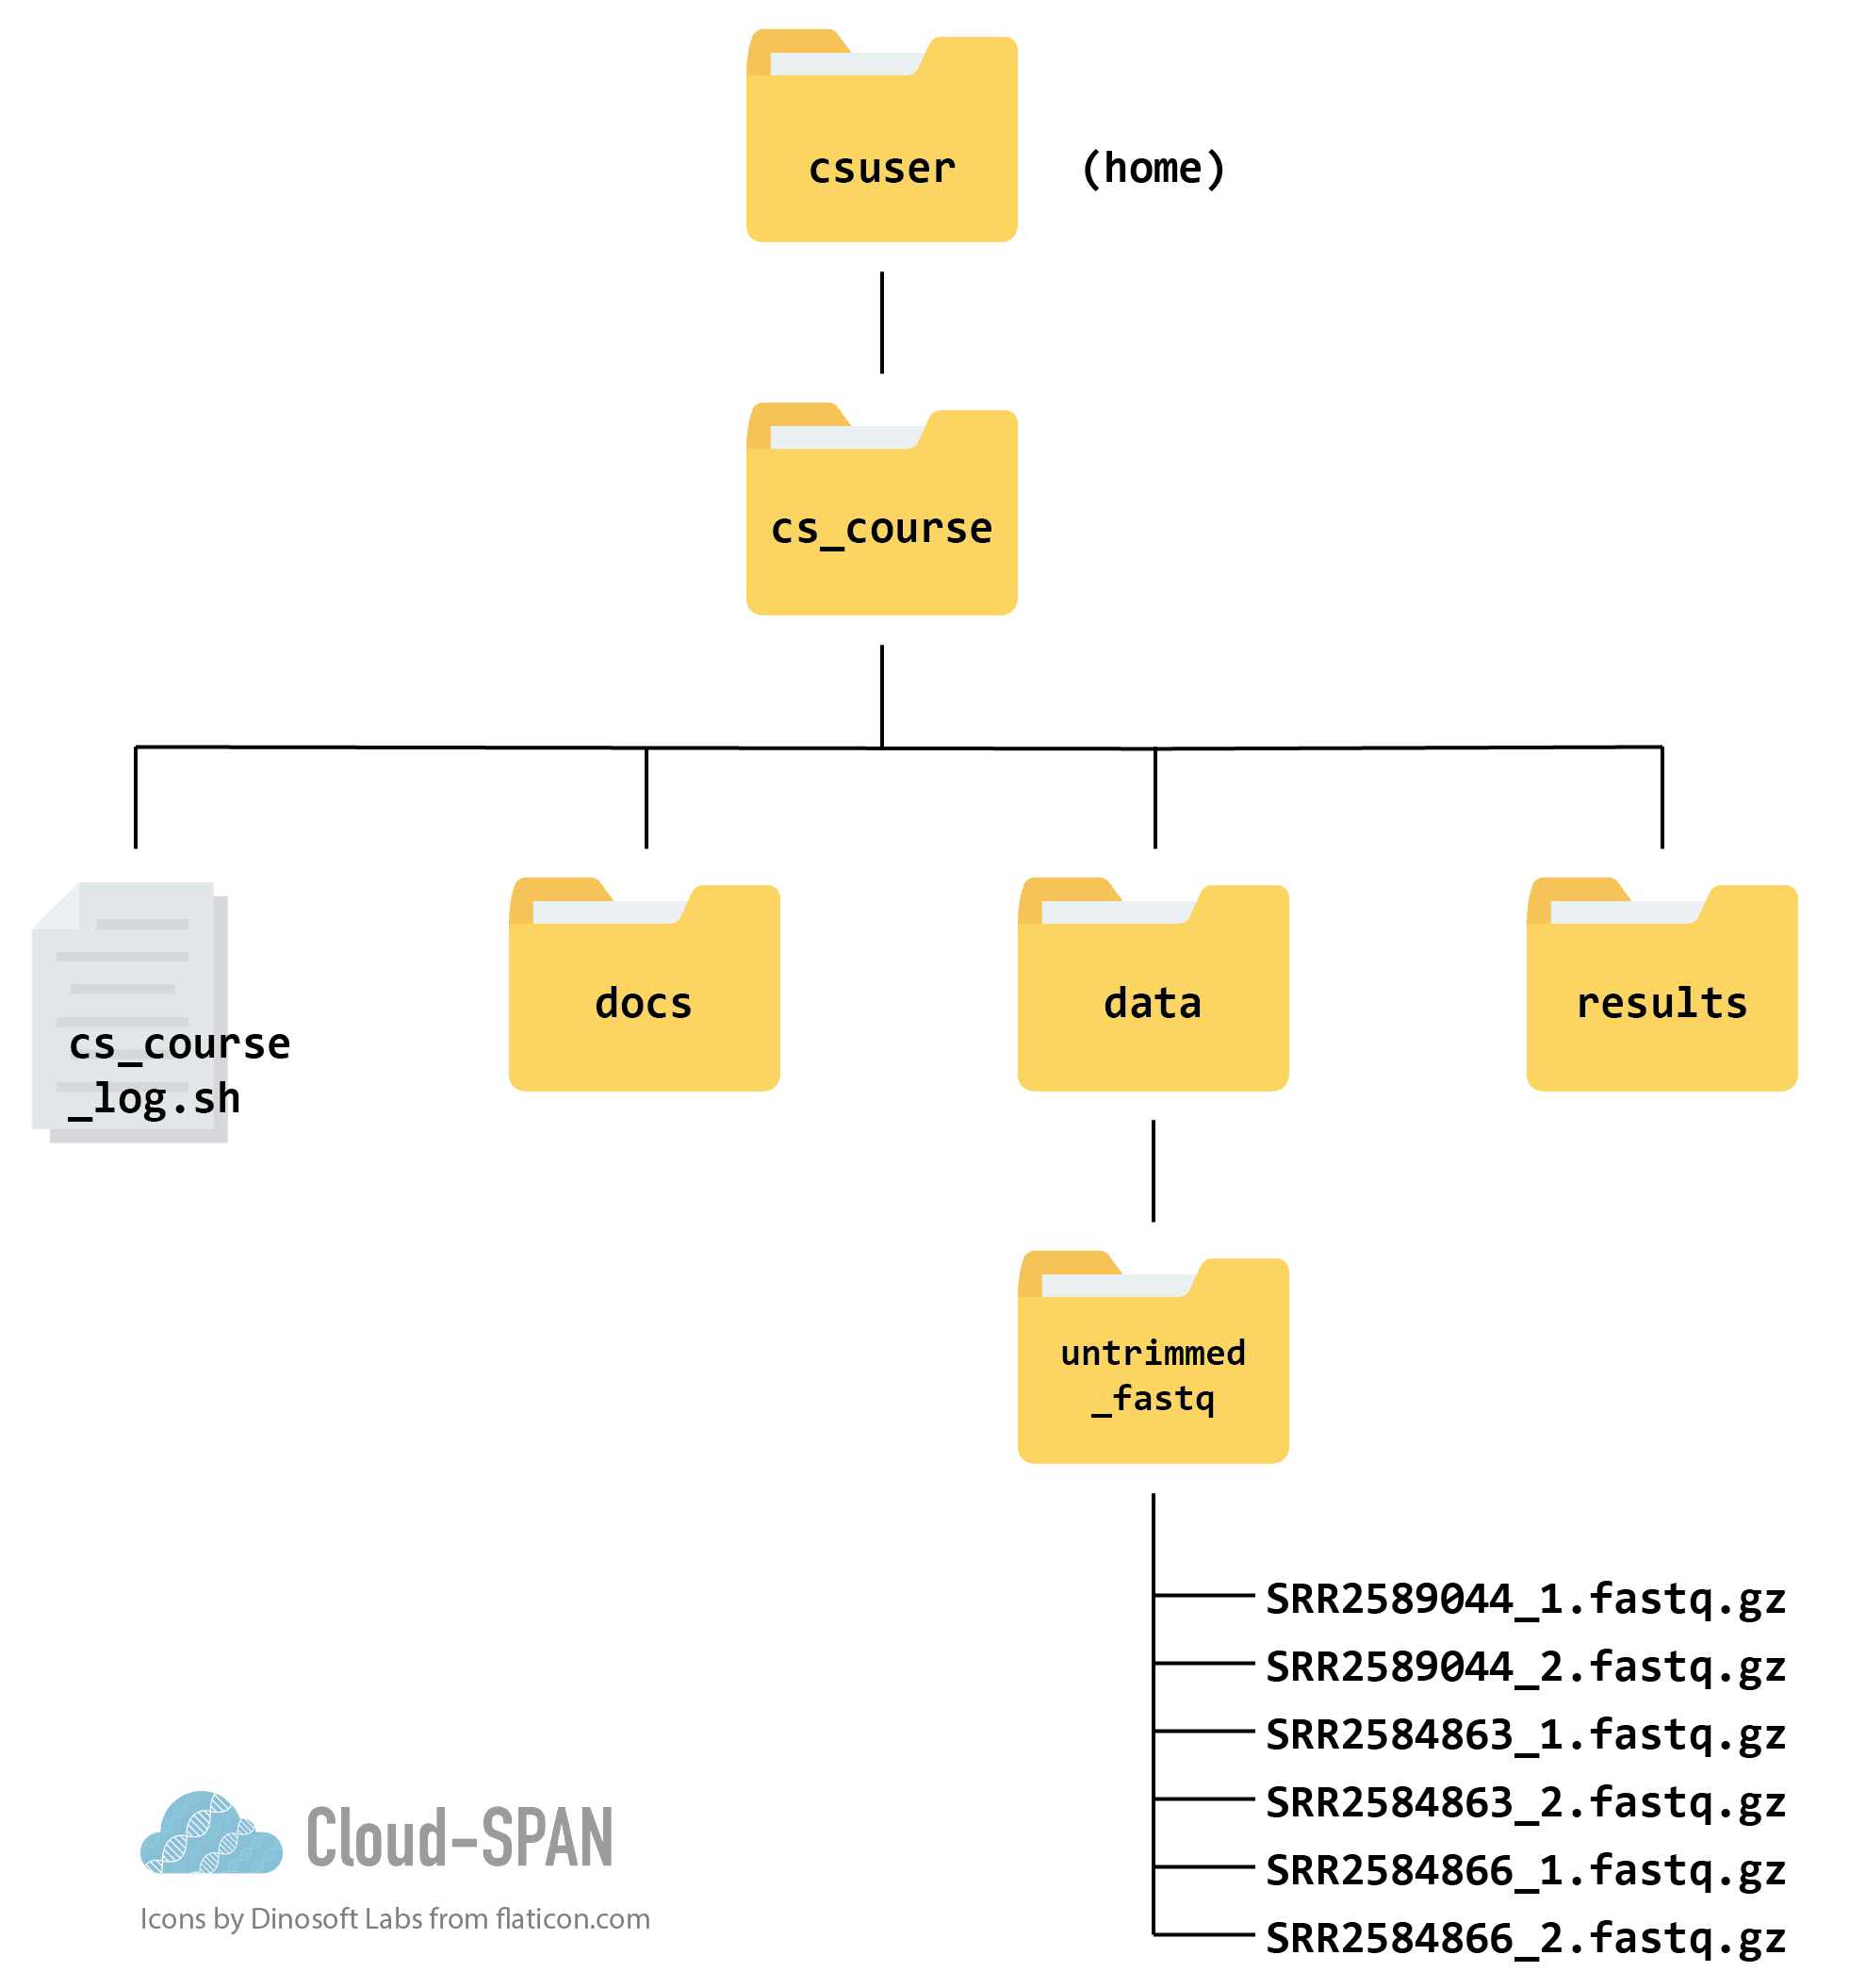 A file structure tree.